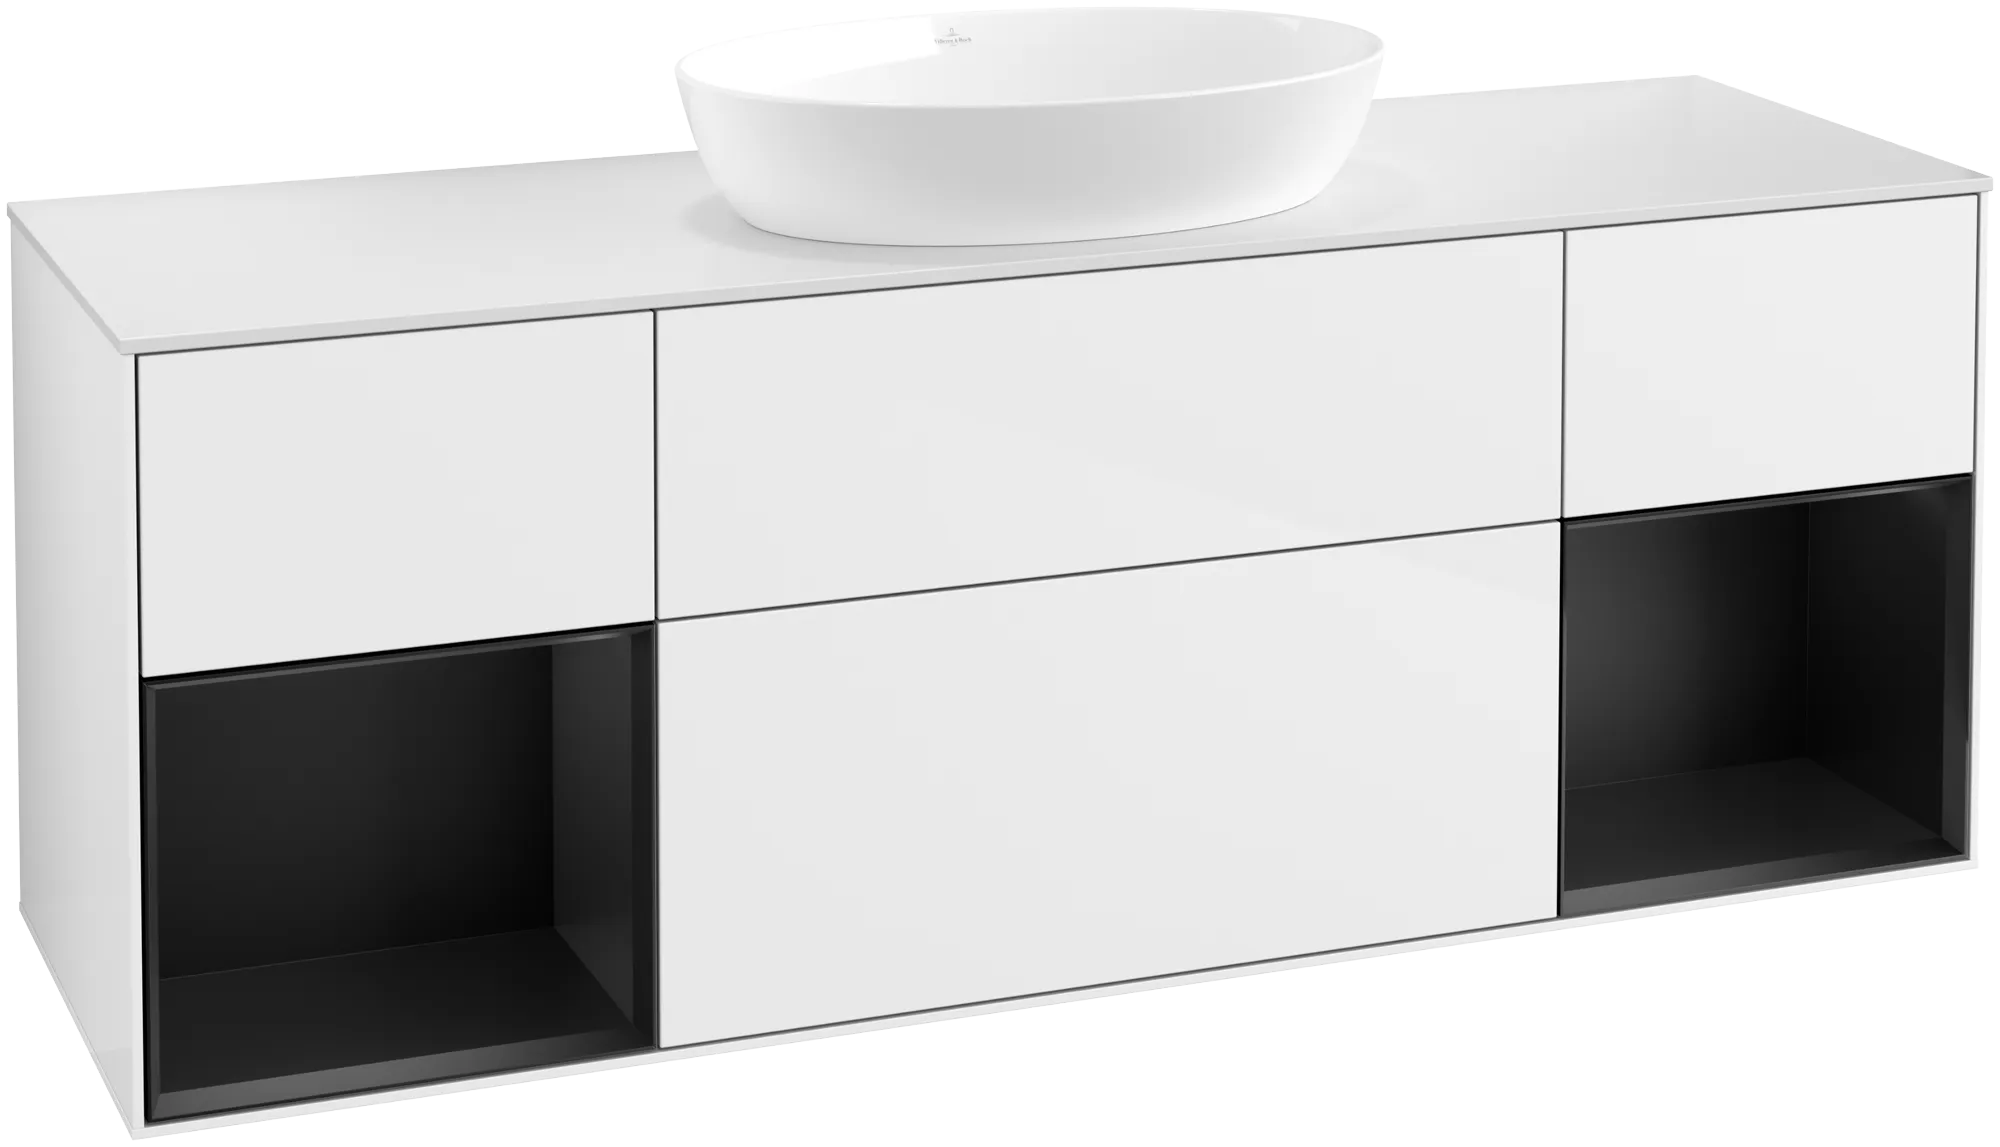 Picture of VILLEROY BOCH Finion Vanity unit, with lighting, 4 pull-out compartments, 1600 x 603 x 501 mm, Glossy White Lacquer / Black Matt Lacquer / Glass White Matt #GD01PDGF